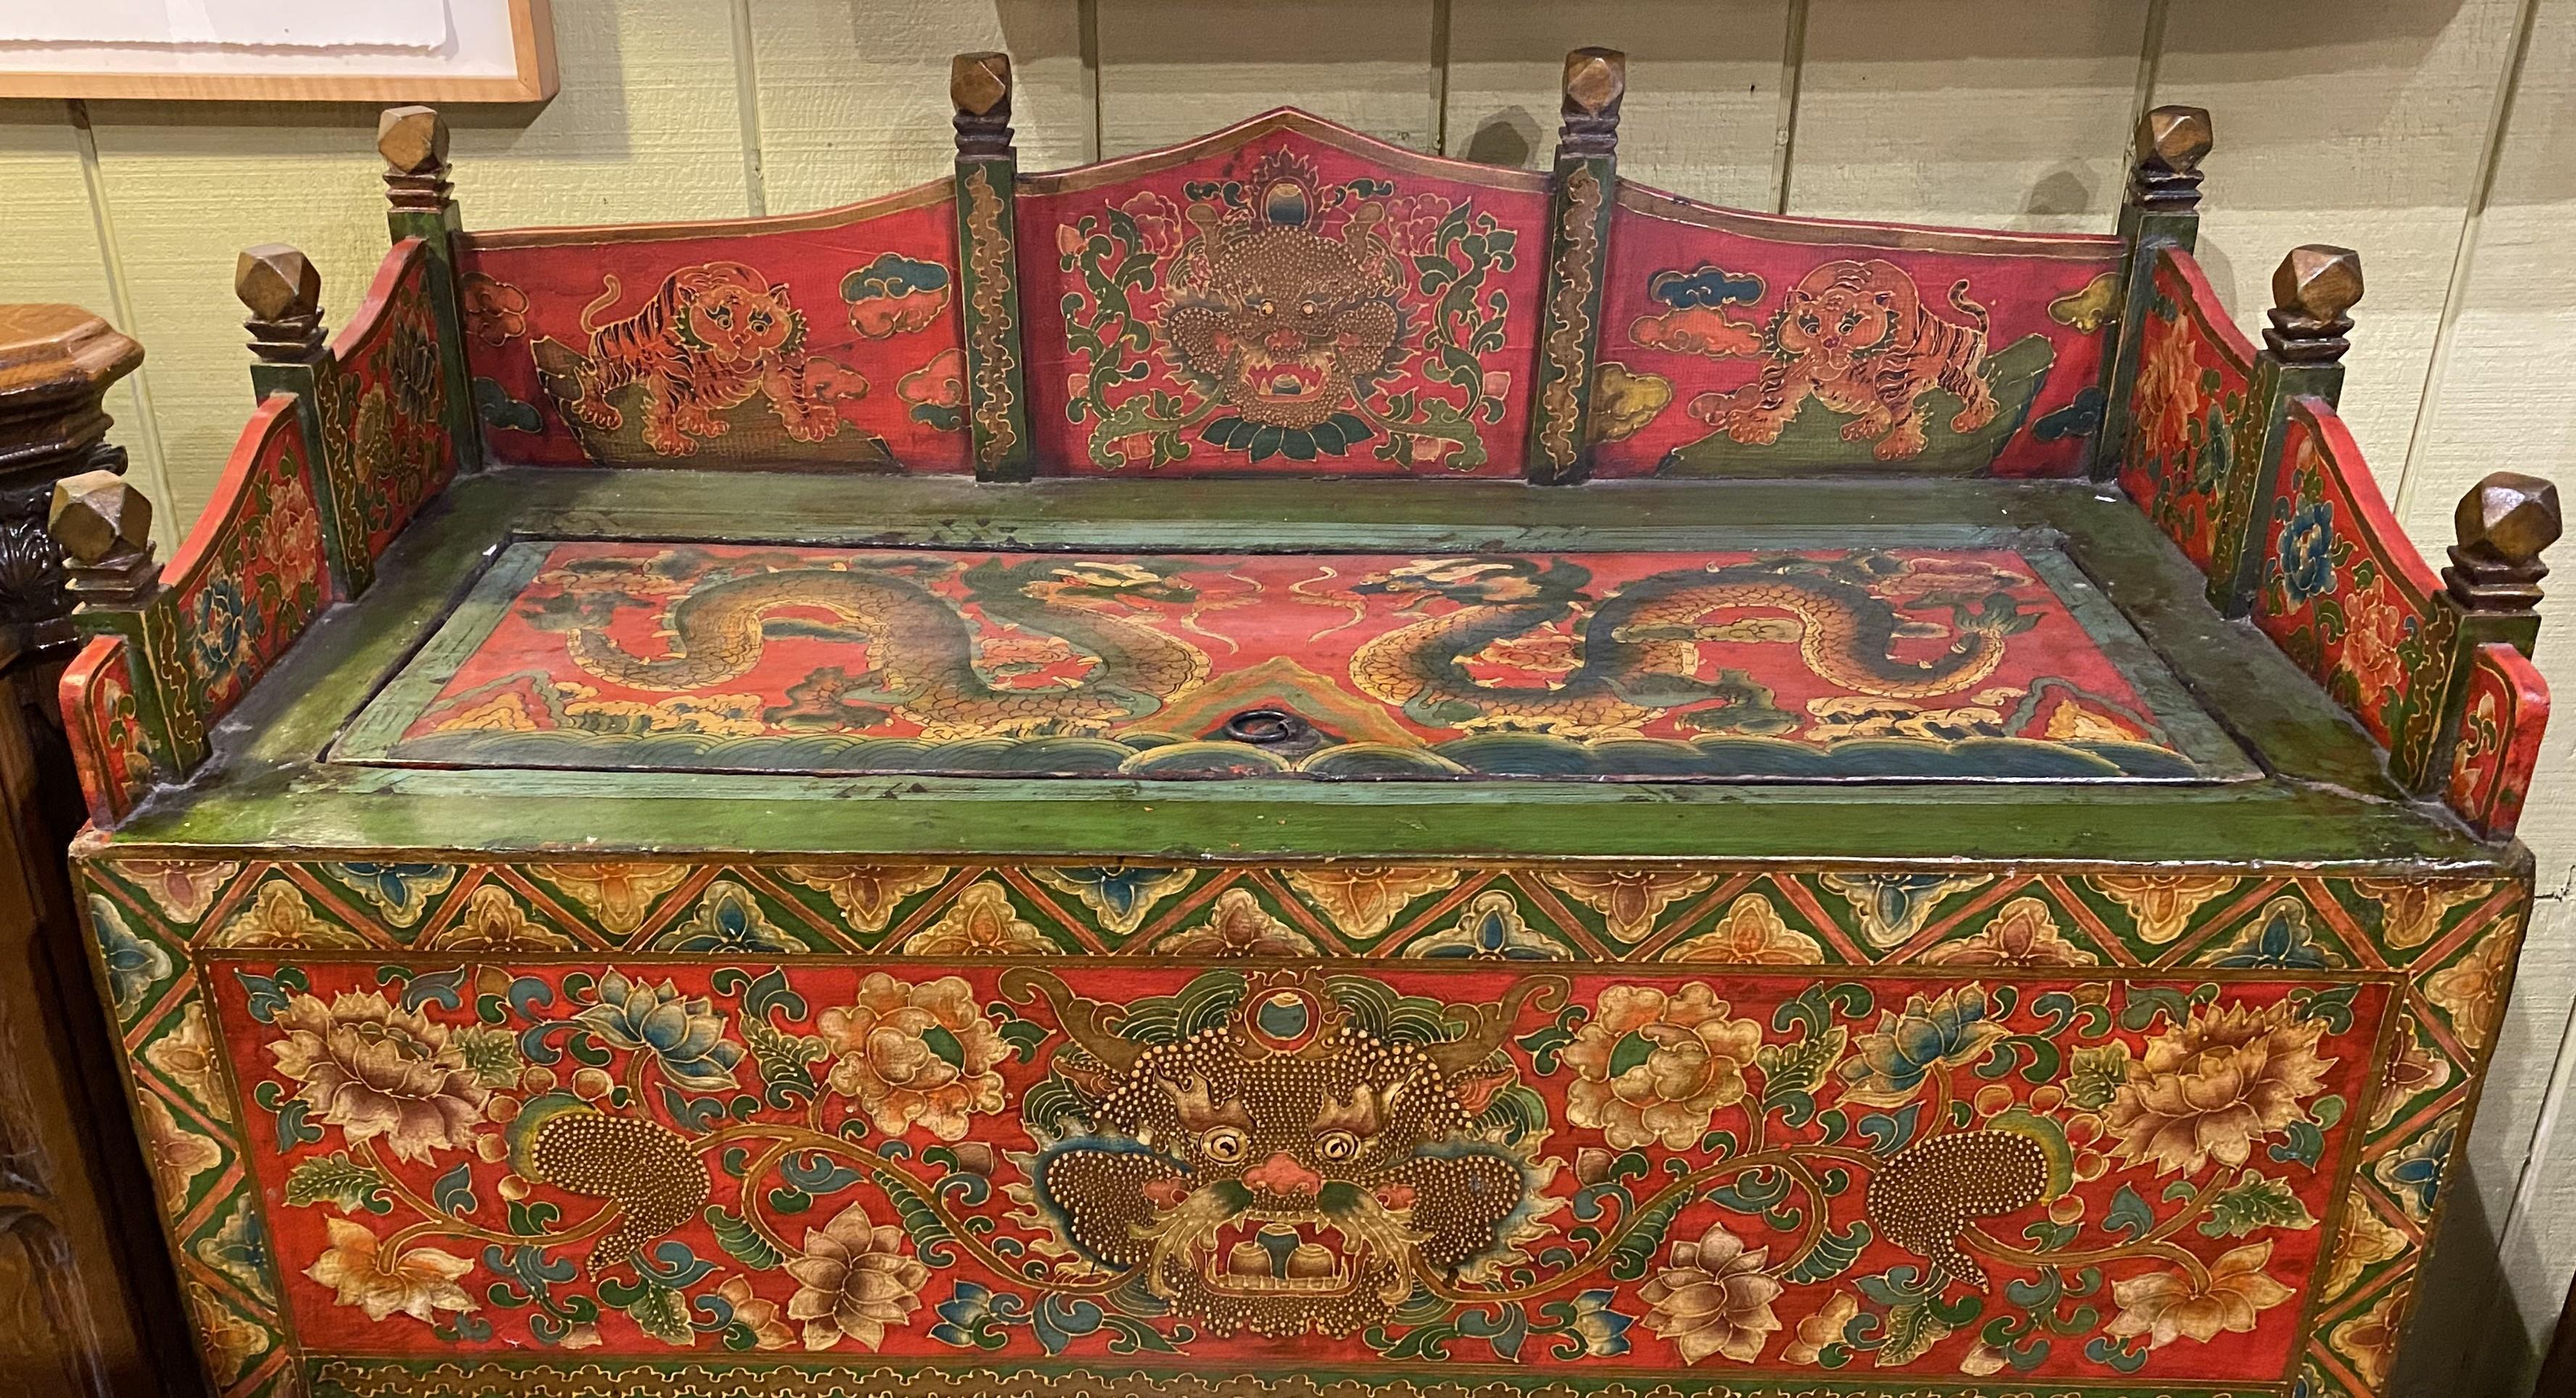 A beautiful polychrome decorated Chinese cabinet with paneled wooden gallery with carved finial posts and hinged lid, opening to two upper storage compartments, over a case with two doors, opening to a single lower storage area. The cabinet features